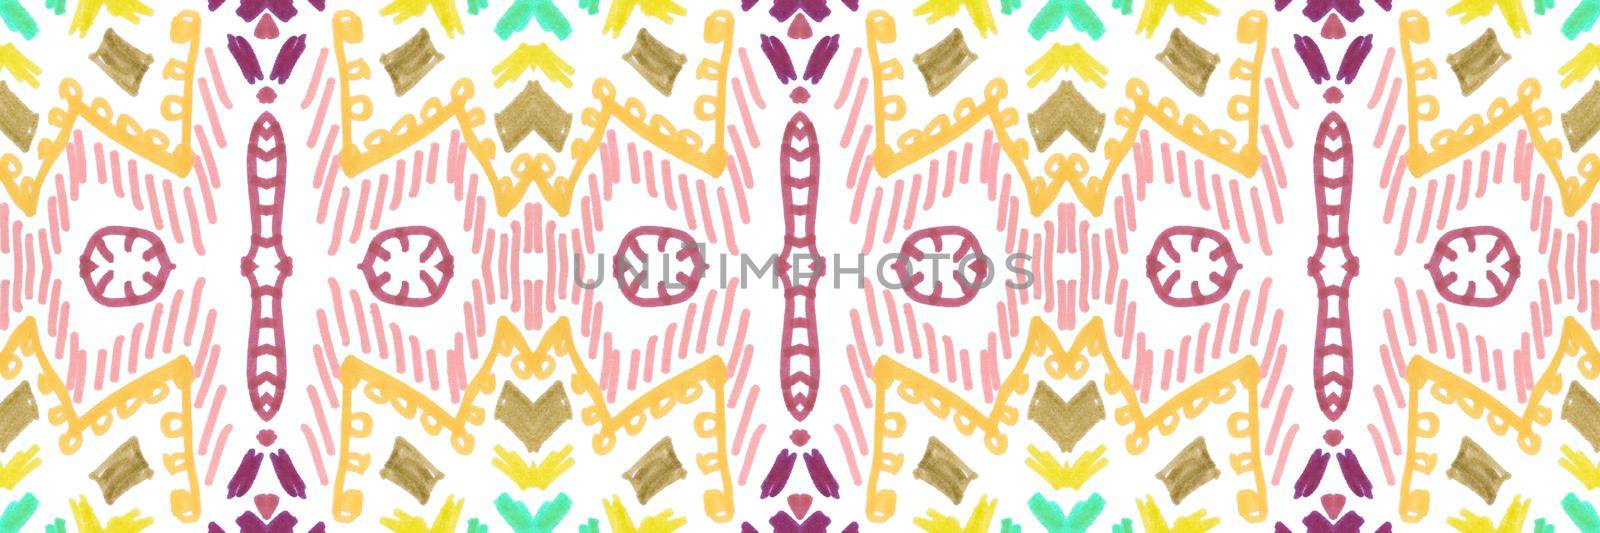 Watercolor mosaic. Abstract geometric ethnic ornament. by YASNARADA